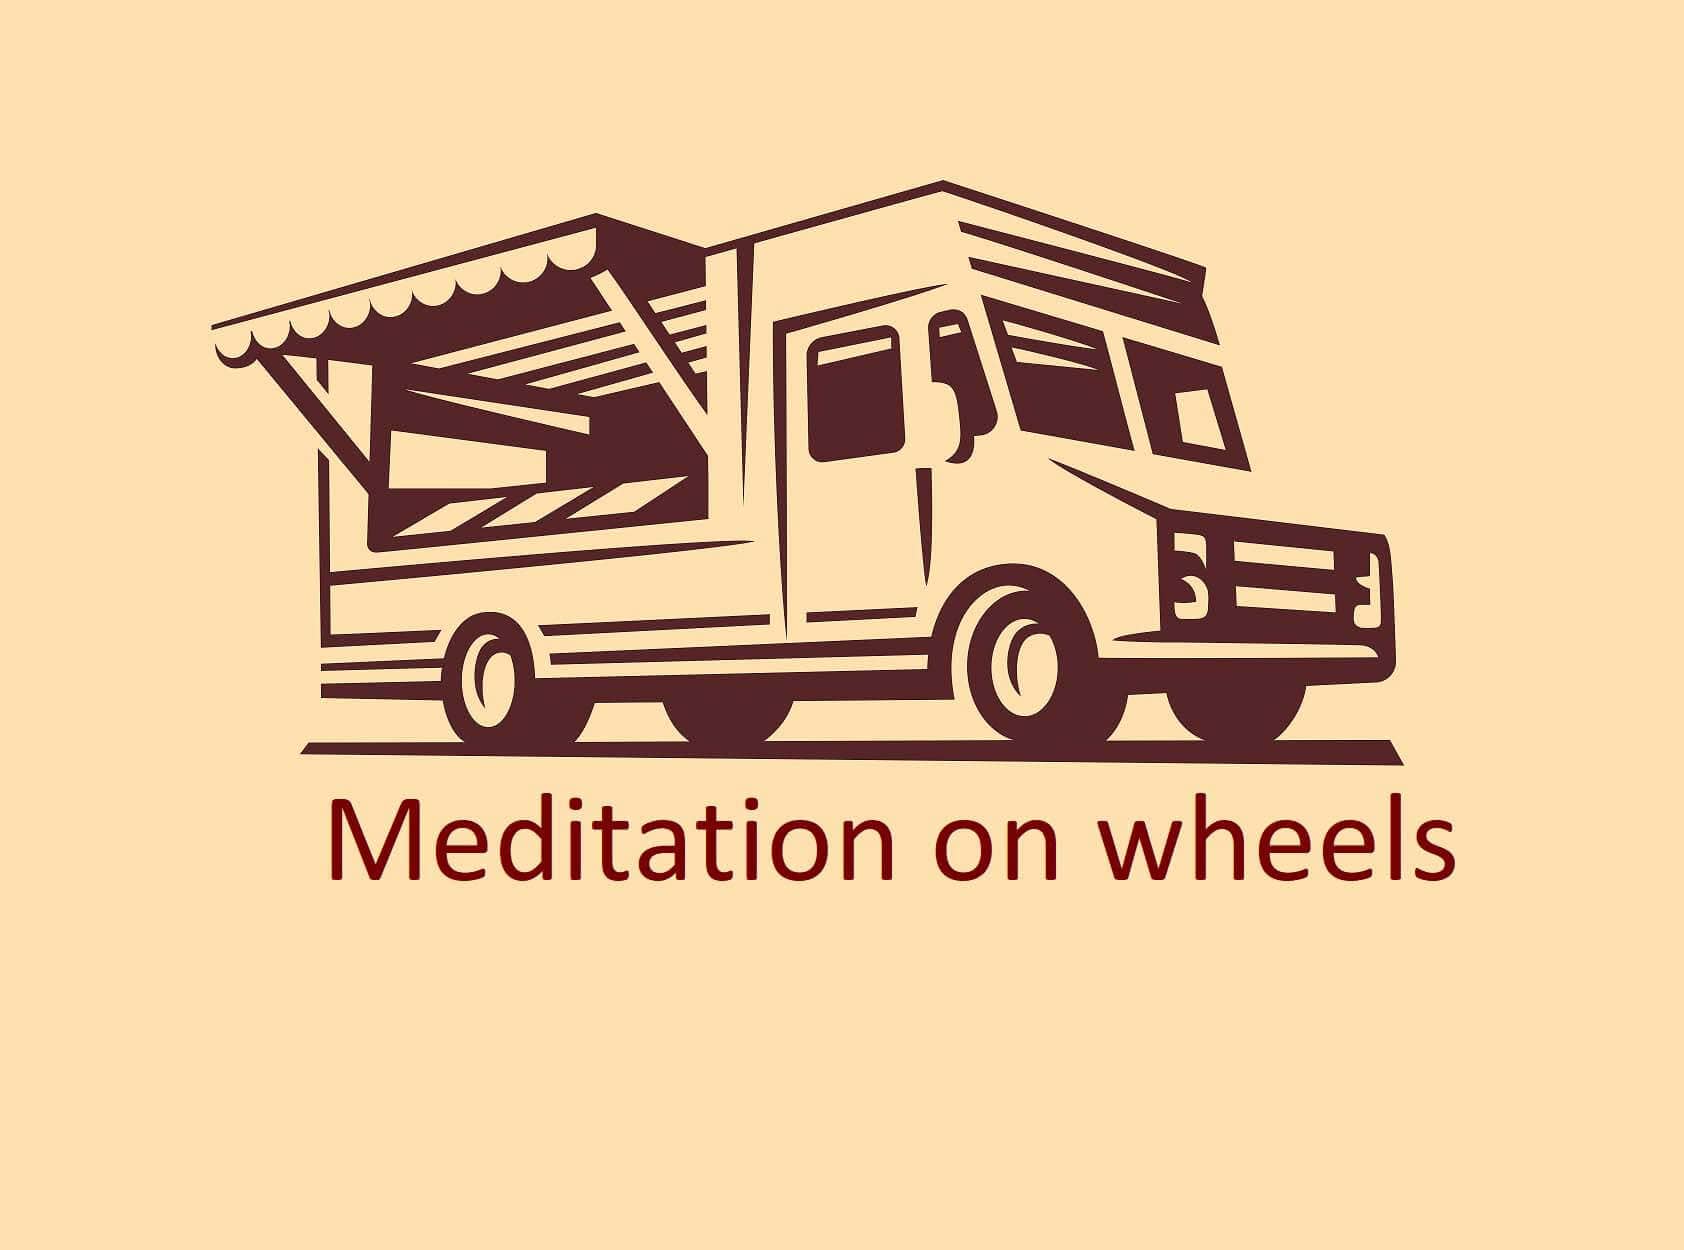 Meditation Trucks are Here but You don’t Need Them